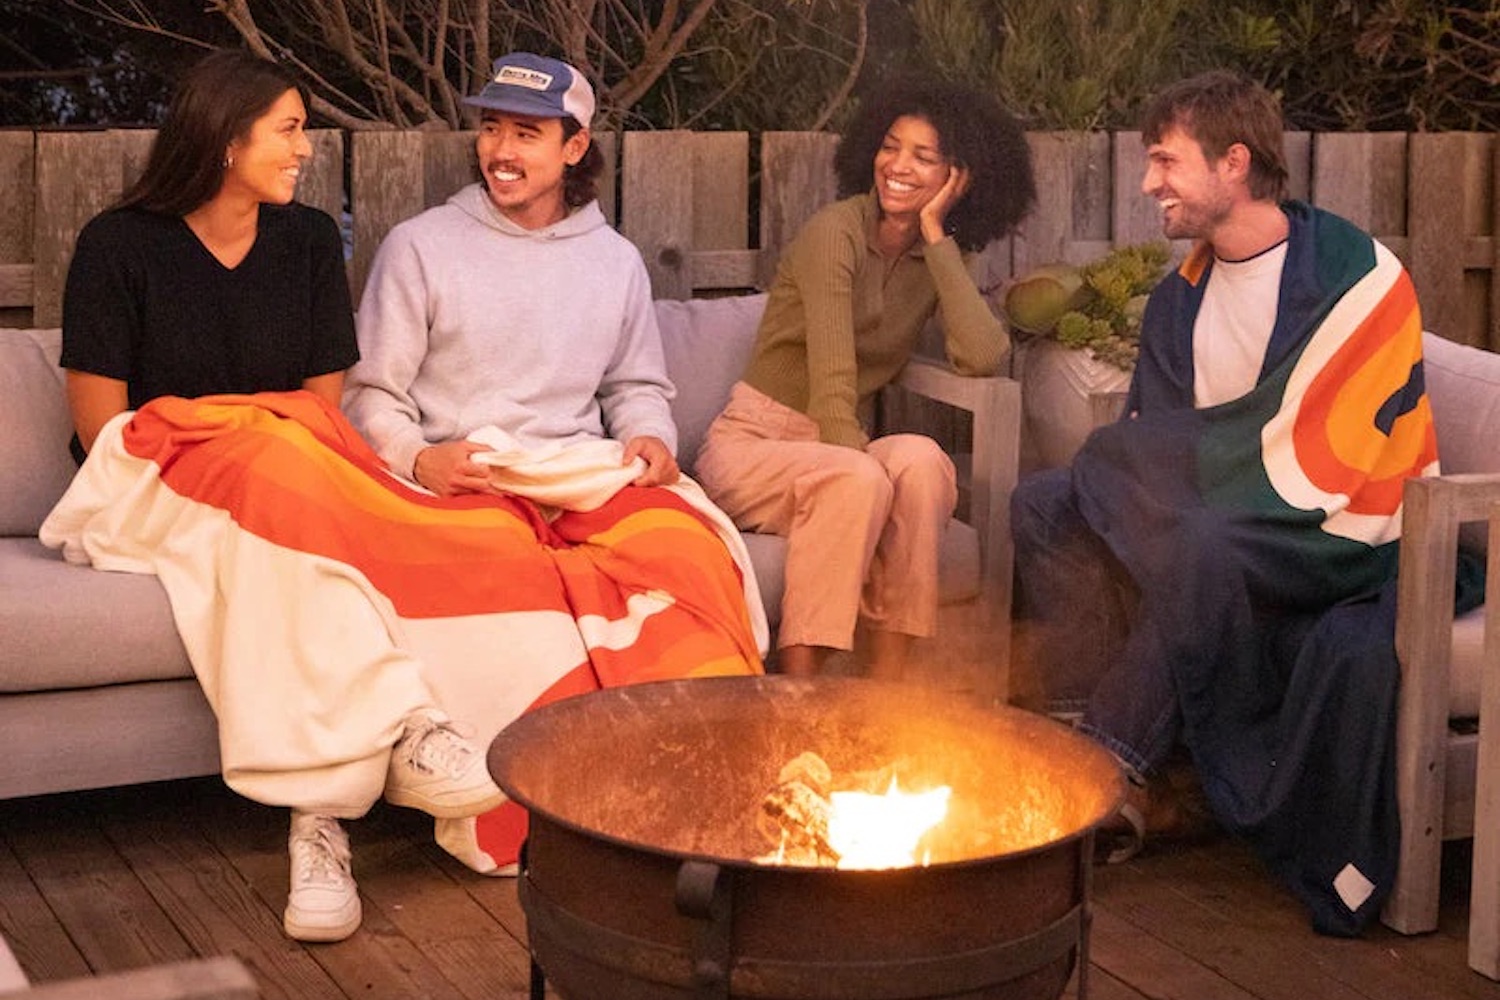 a quadruplet of people sitting on a couch in front of a fire drapped in RUMPL blankets